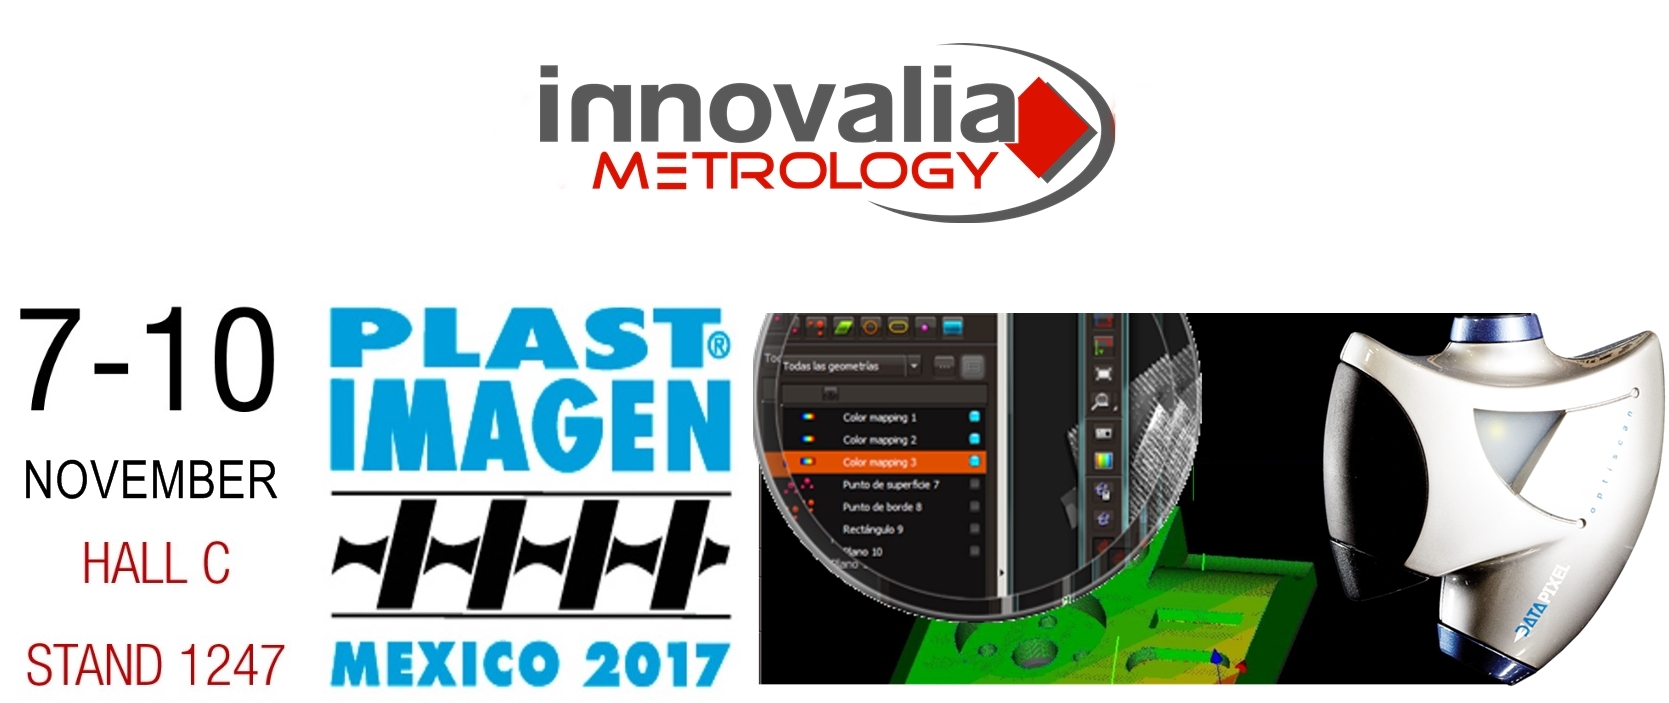 Innovalia Metrology presents Metrology 4.0 solutions at the PlastIMAGEN exhibition in Mexico